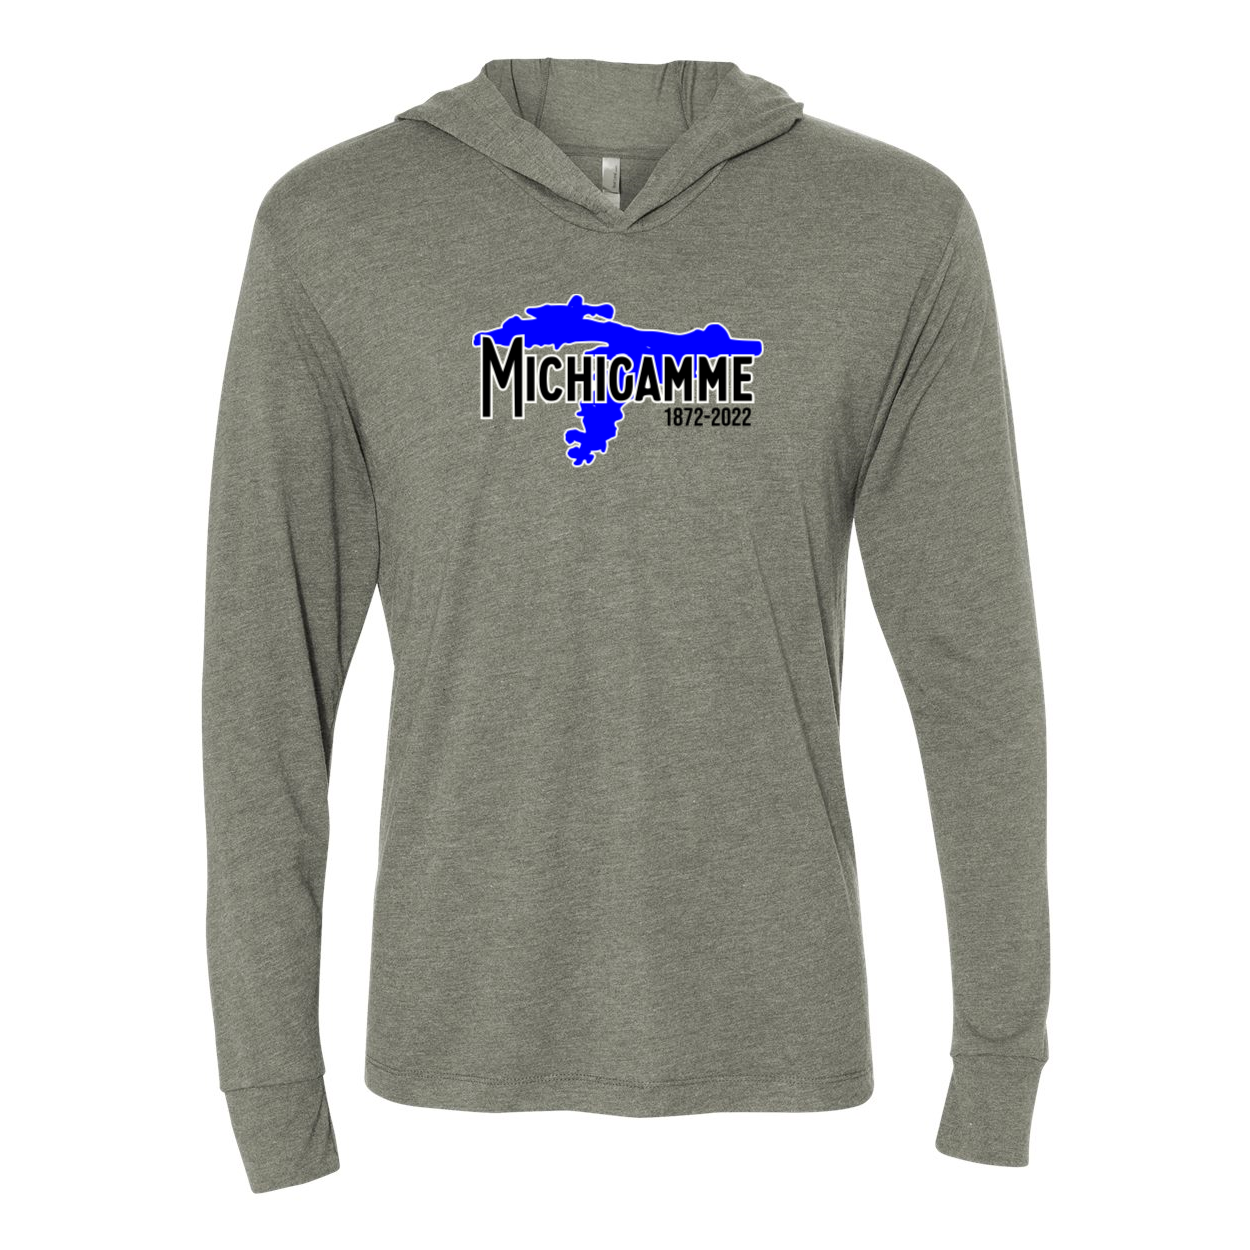 Michigamme Hooded Tee